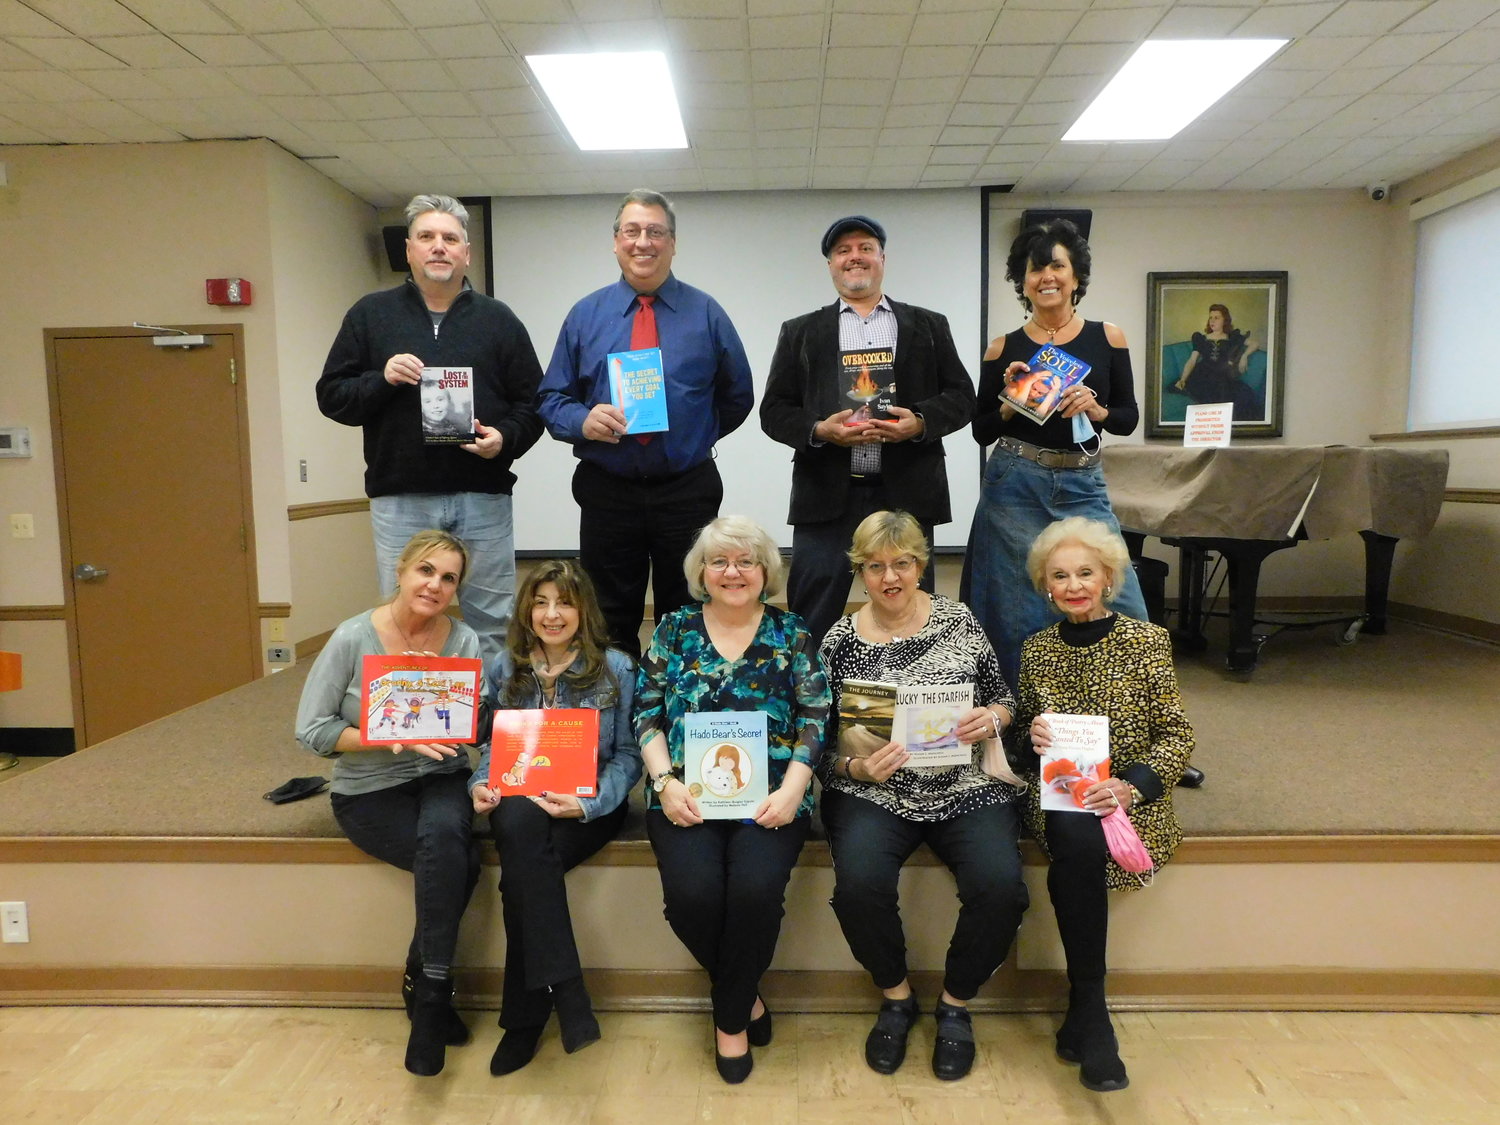 Eight members of the Long Island Author Coalition brought their works to a joint book signing event on Nov. 7. From left, standing, Tom Gibson, Stephen G. Flecker, Ivan Sayles, and Kelly Tallaksen. Seated, Patti Damelio with illustrator Isabelle Rappaciuolo, Kathleen Quigley Caputo, Susan J. Menchell, and Maria V. Hughes.